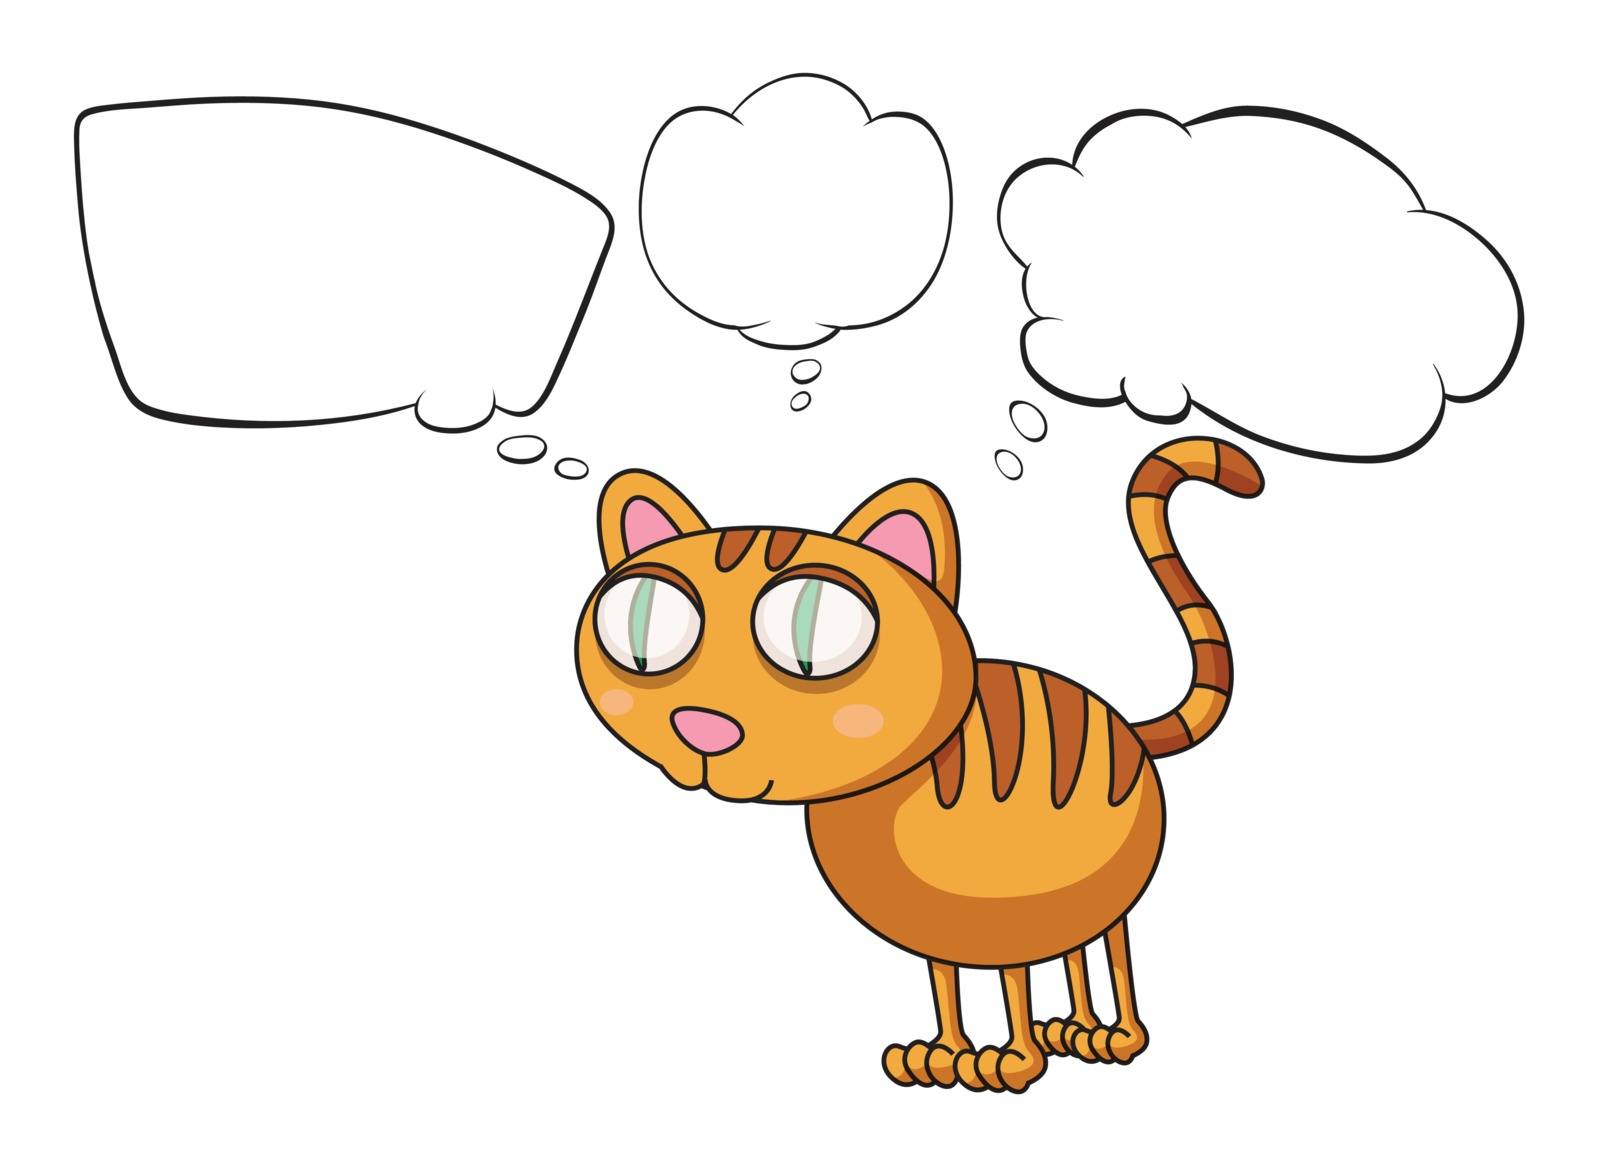 Illustration of the cat thinking on a white background